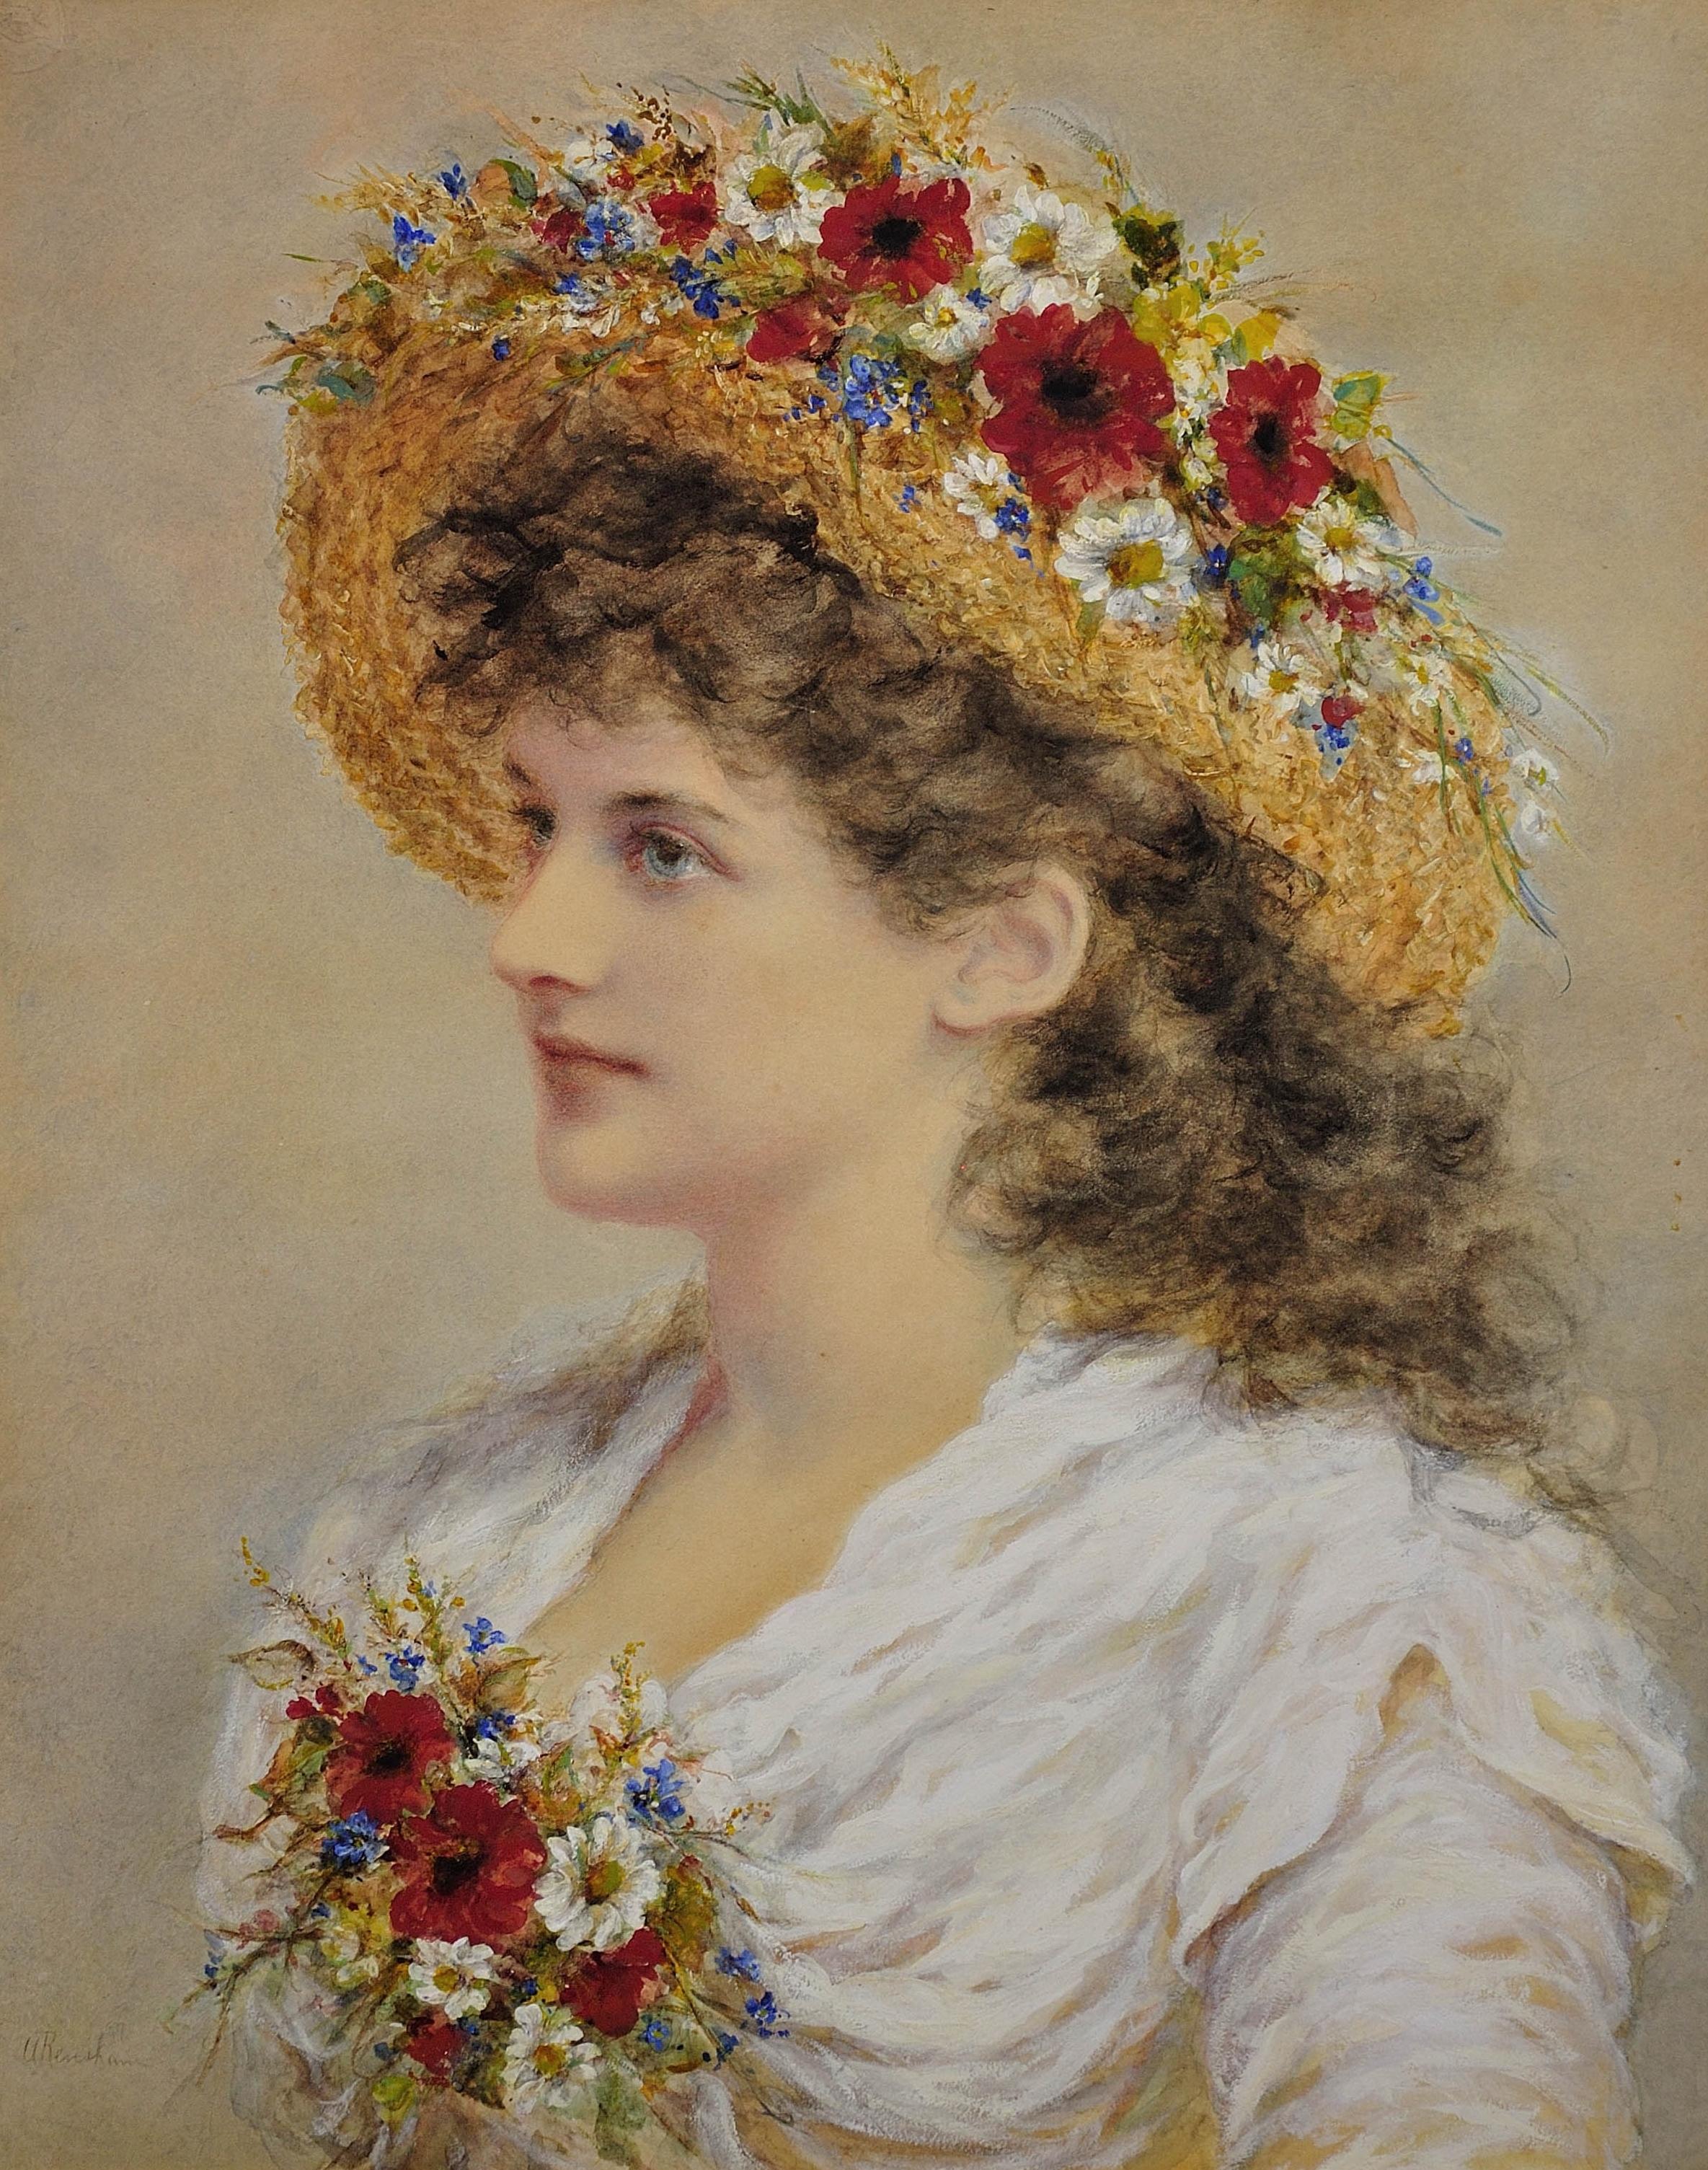 Summer Fashion. Young Victorian Lady With Meadow Flowers In Her Straw Hat - Painting by Alice Anne Renshaw